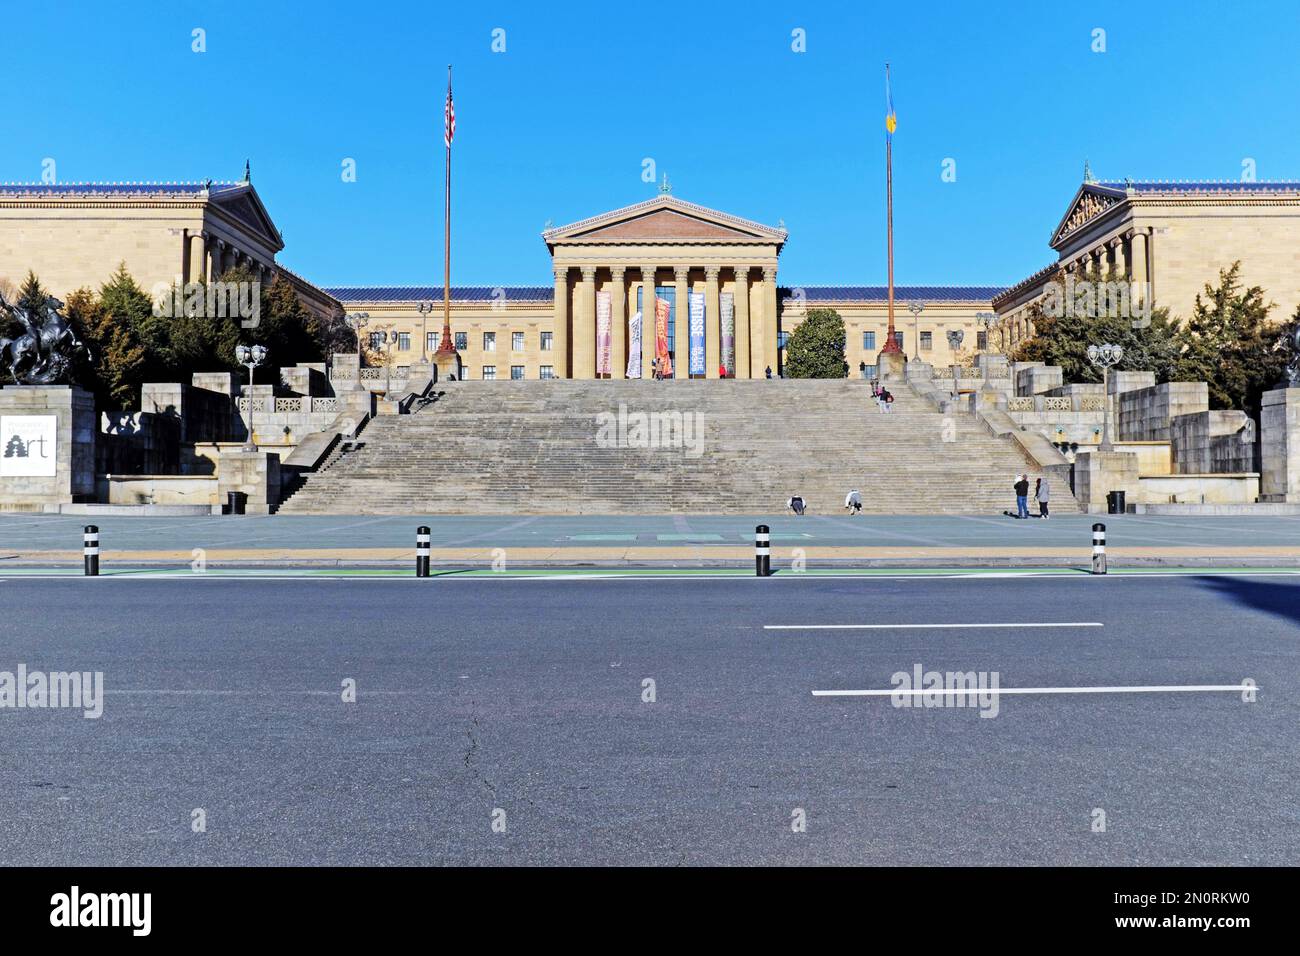 The famous 'Rocky' steps provide a grand entrance into the grounds of the Philadelphia Museum of Art in Philadelphia, Pennsylvania. Stock Photo